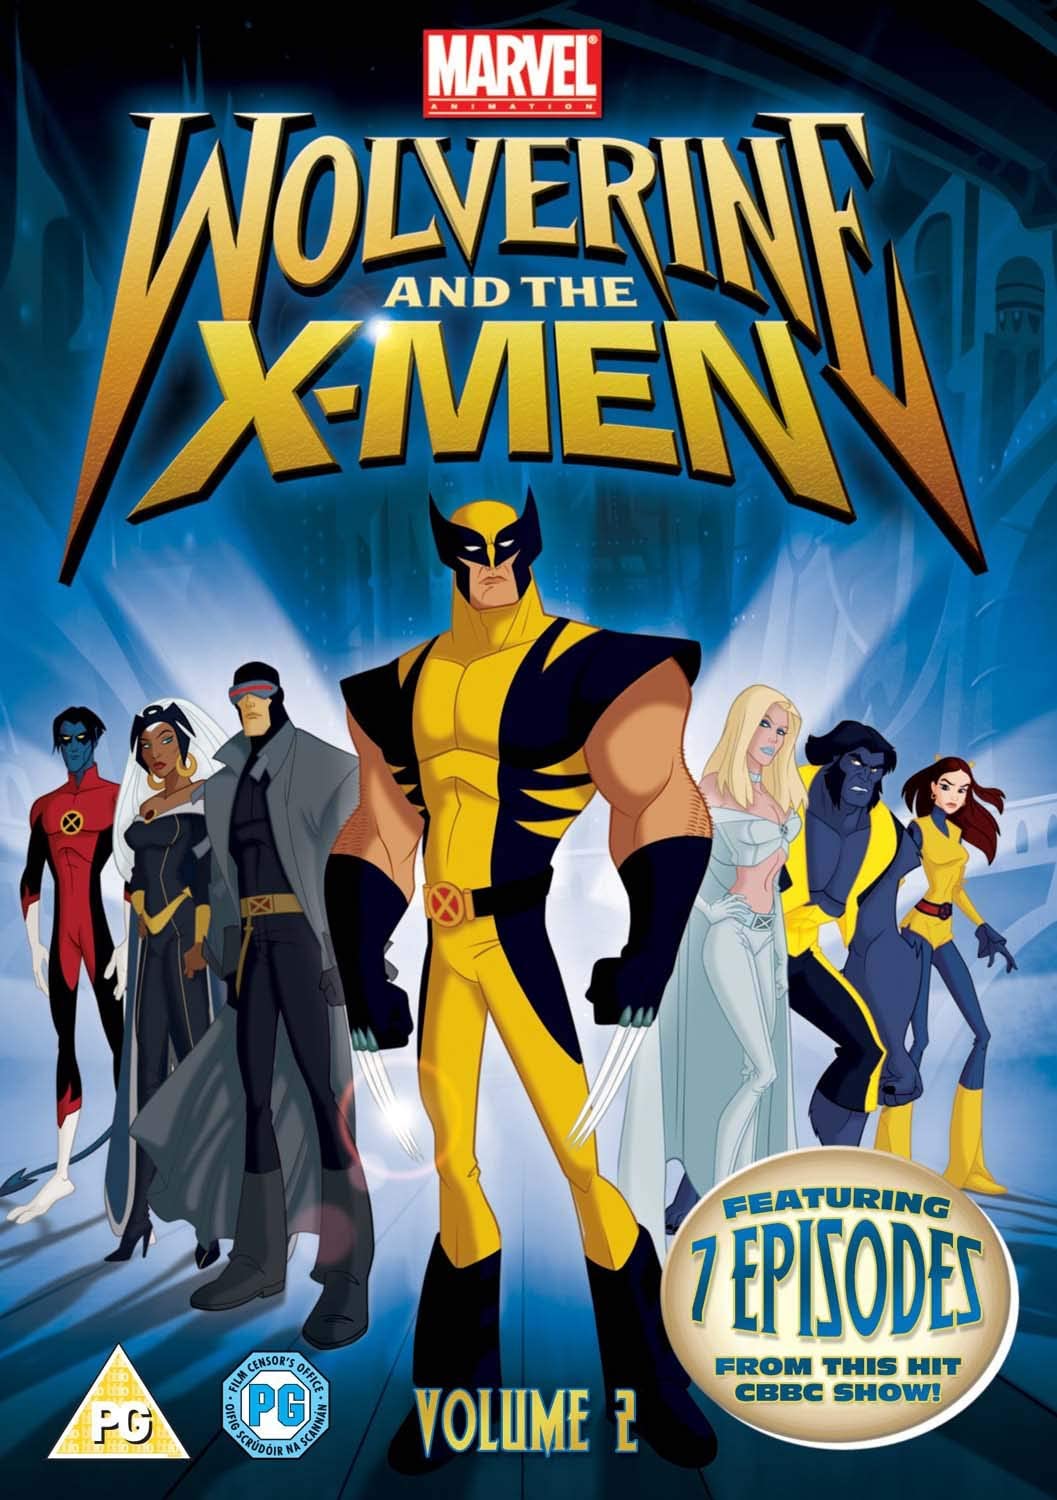 Wolverine And The X-Men Vol.2 [2008] - Animation [DVD]